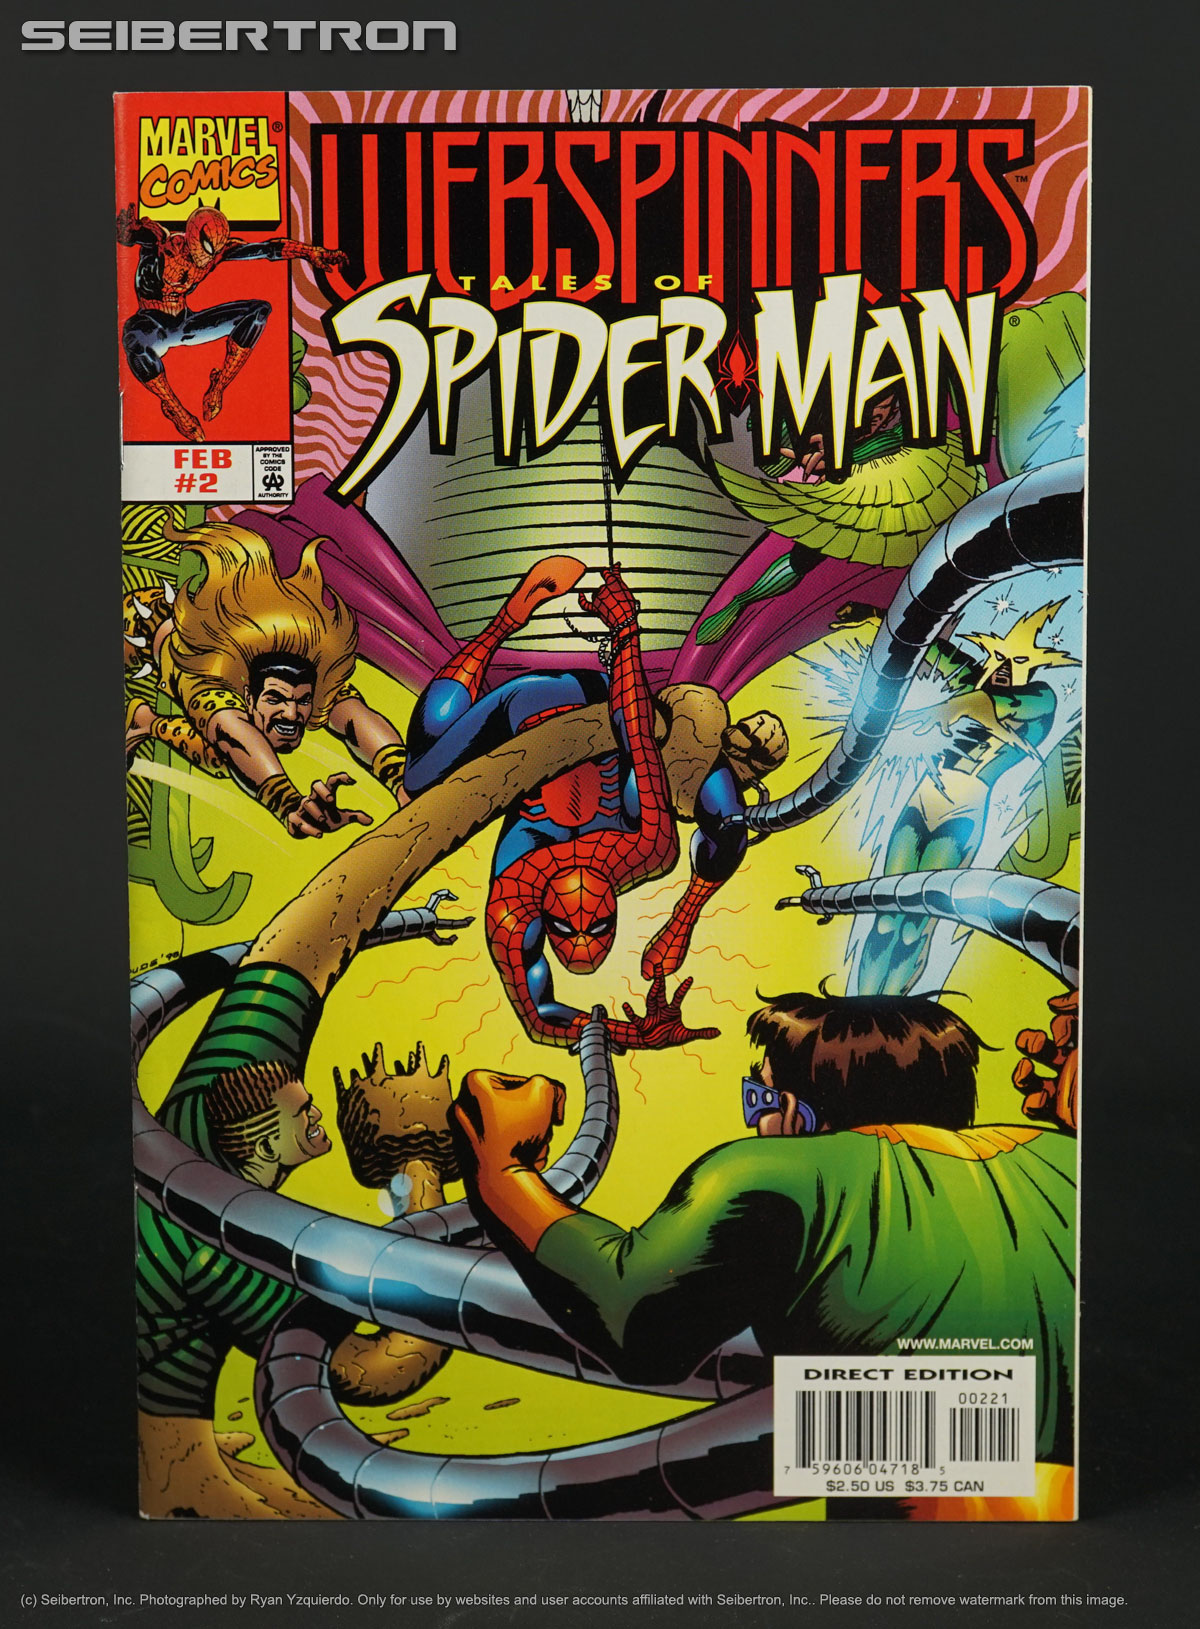 WEBSPINNERS Tales of Spider-Man #2 with Sinister Six Marvel Comics 1999